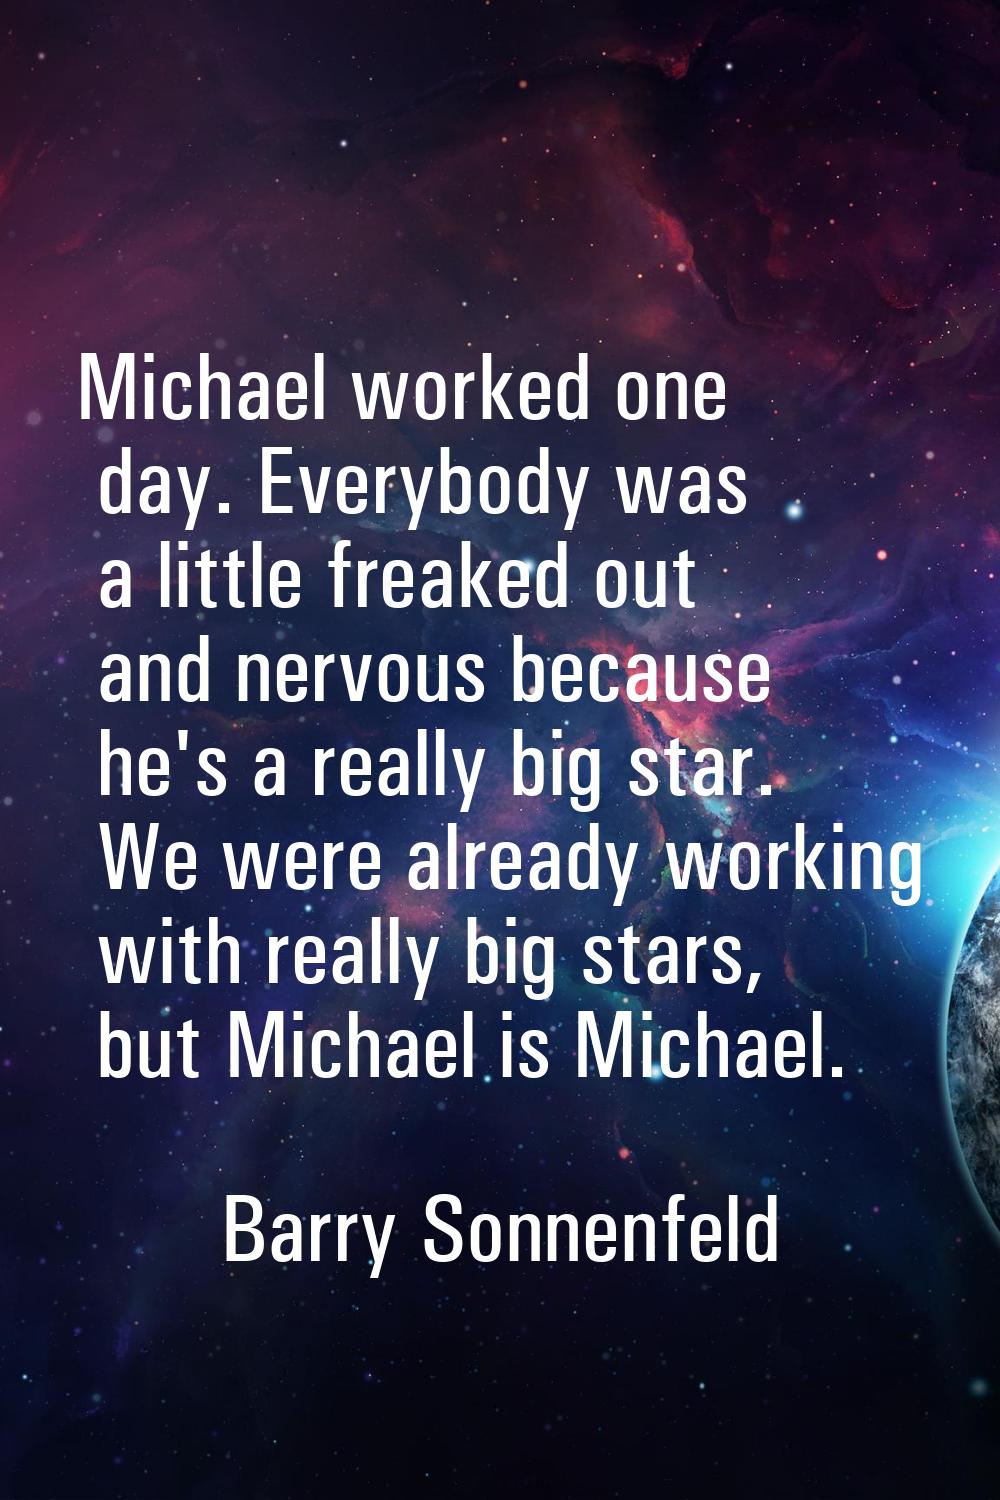 Michael worked one day. Everybody was a little freaked out and nervous because he's a really big st